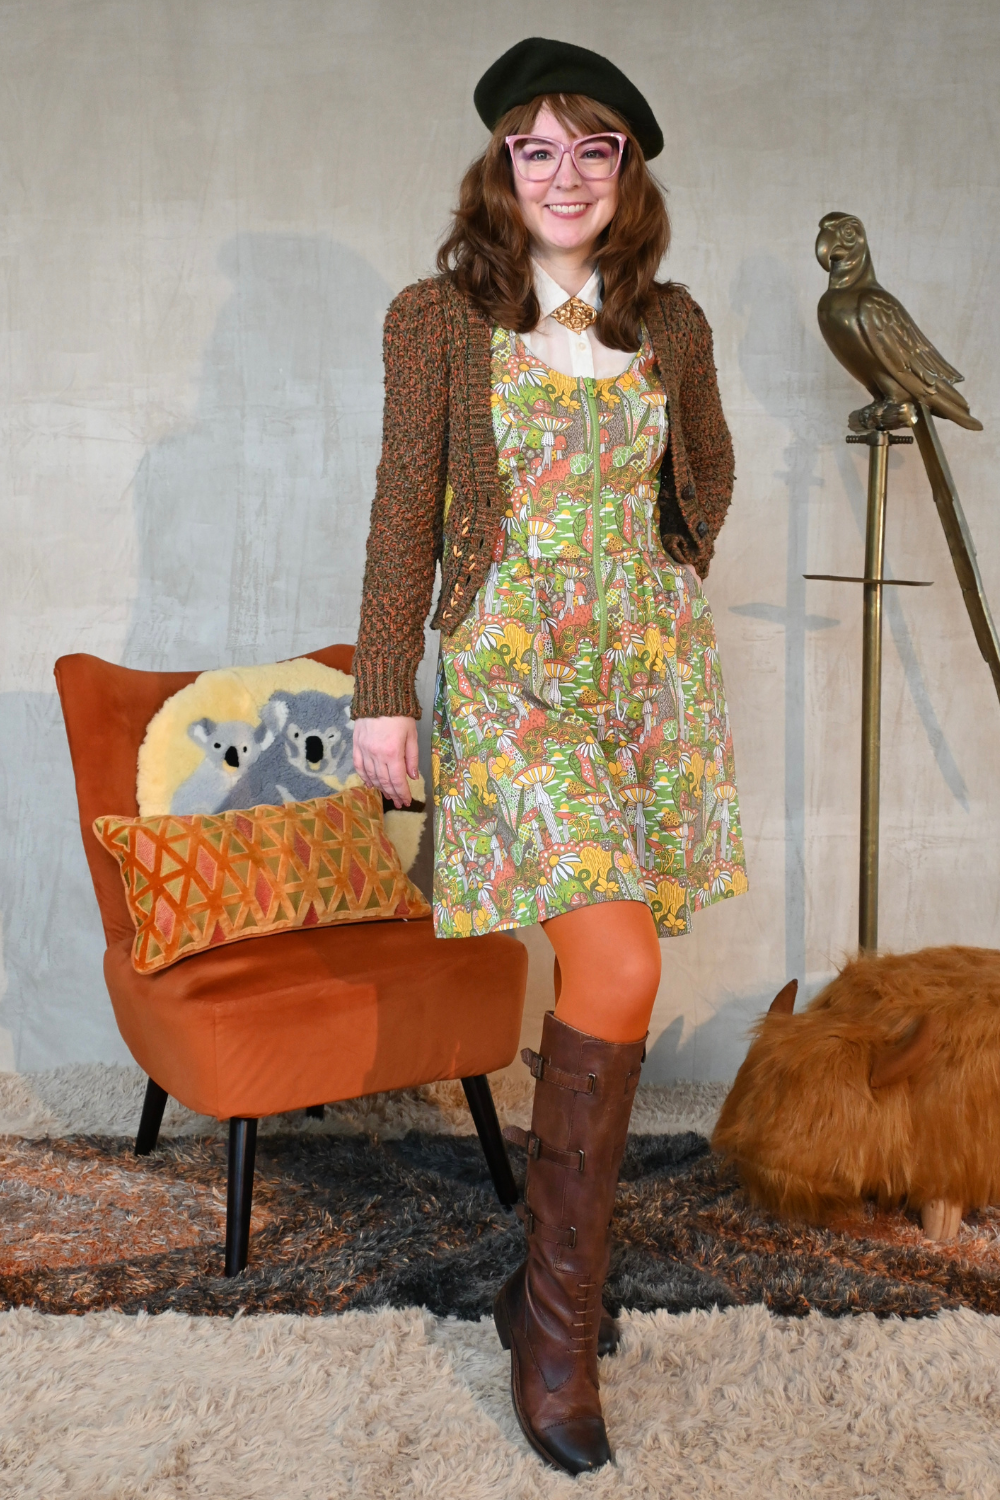 Cute brown-haired girl wearing mushroom print layered with cute cardigan, tights, boots and a beret in living room with bird statue